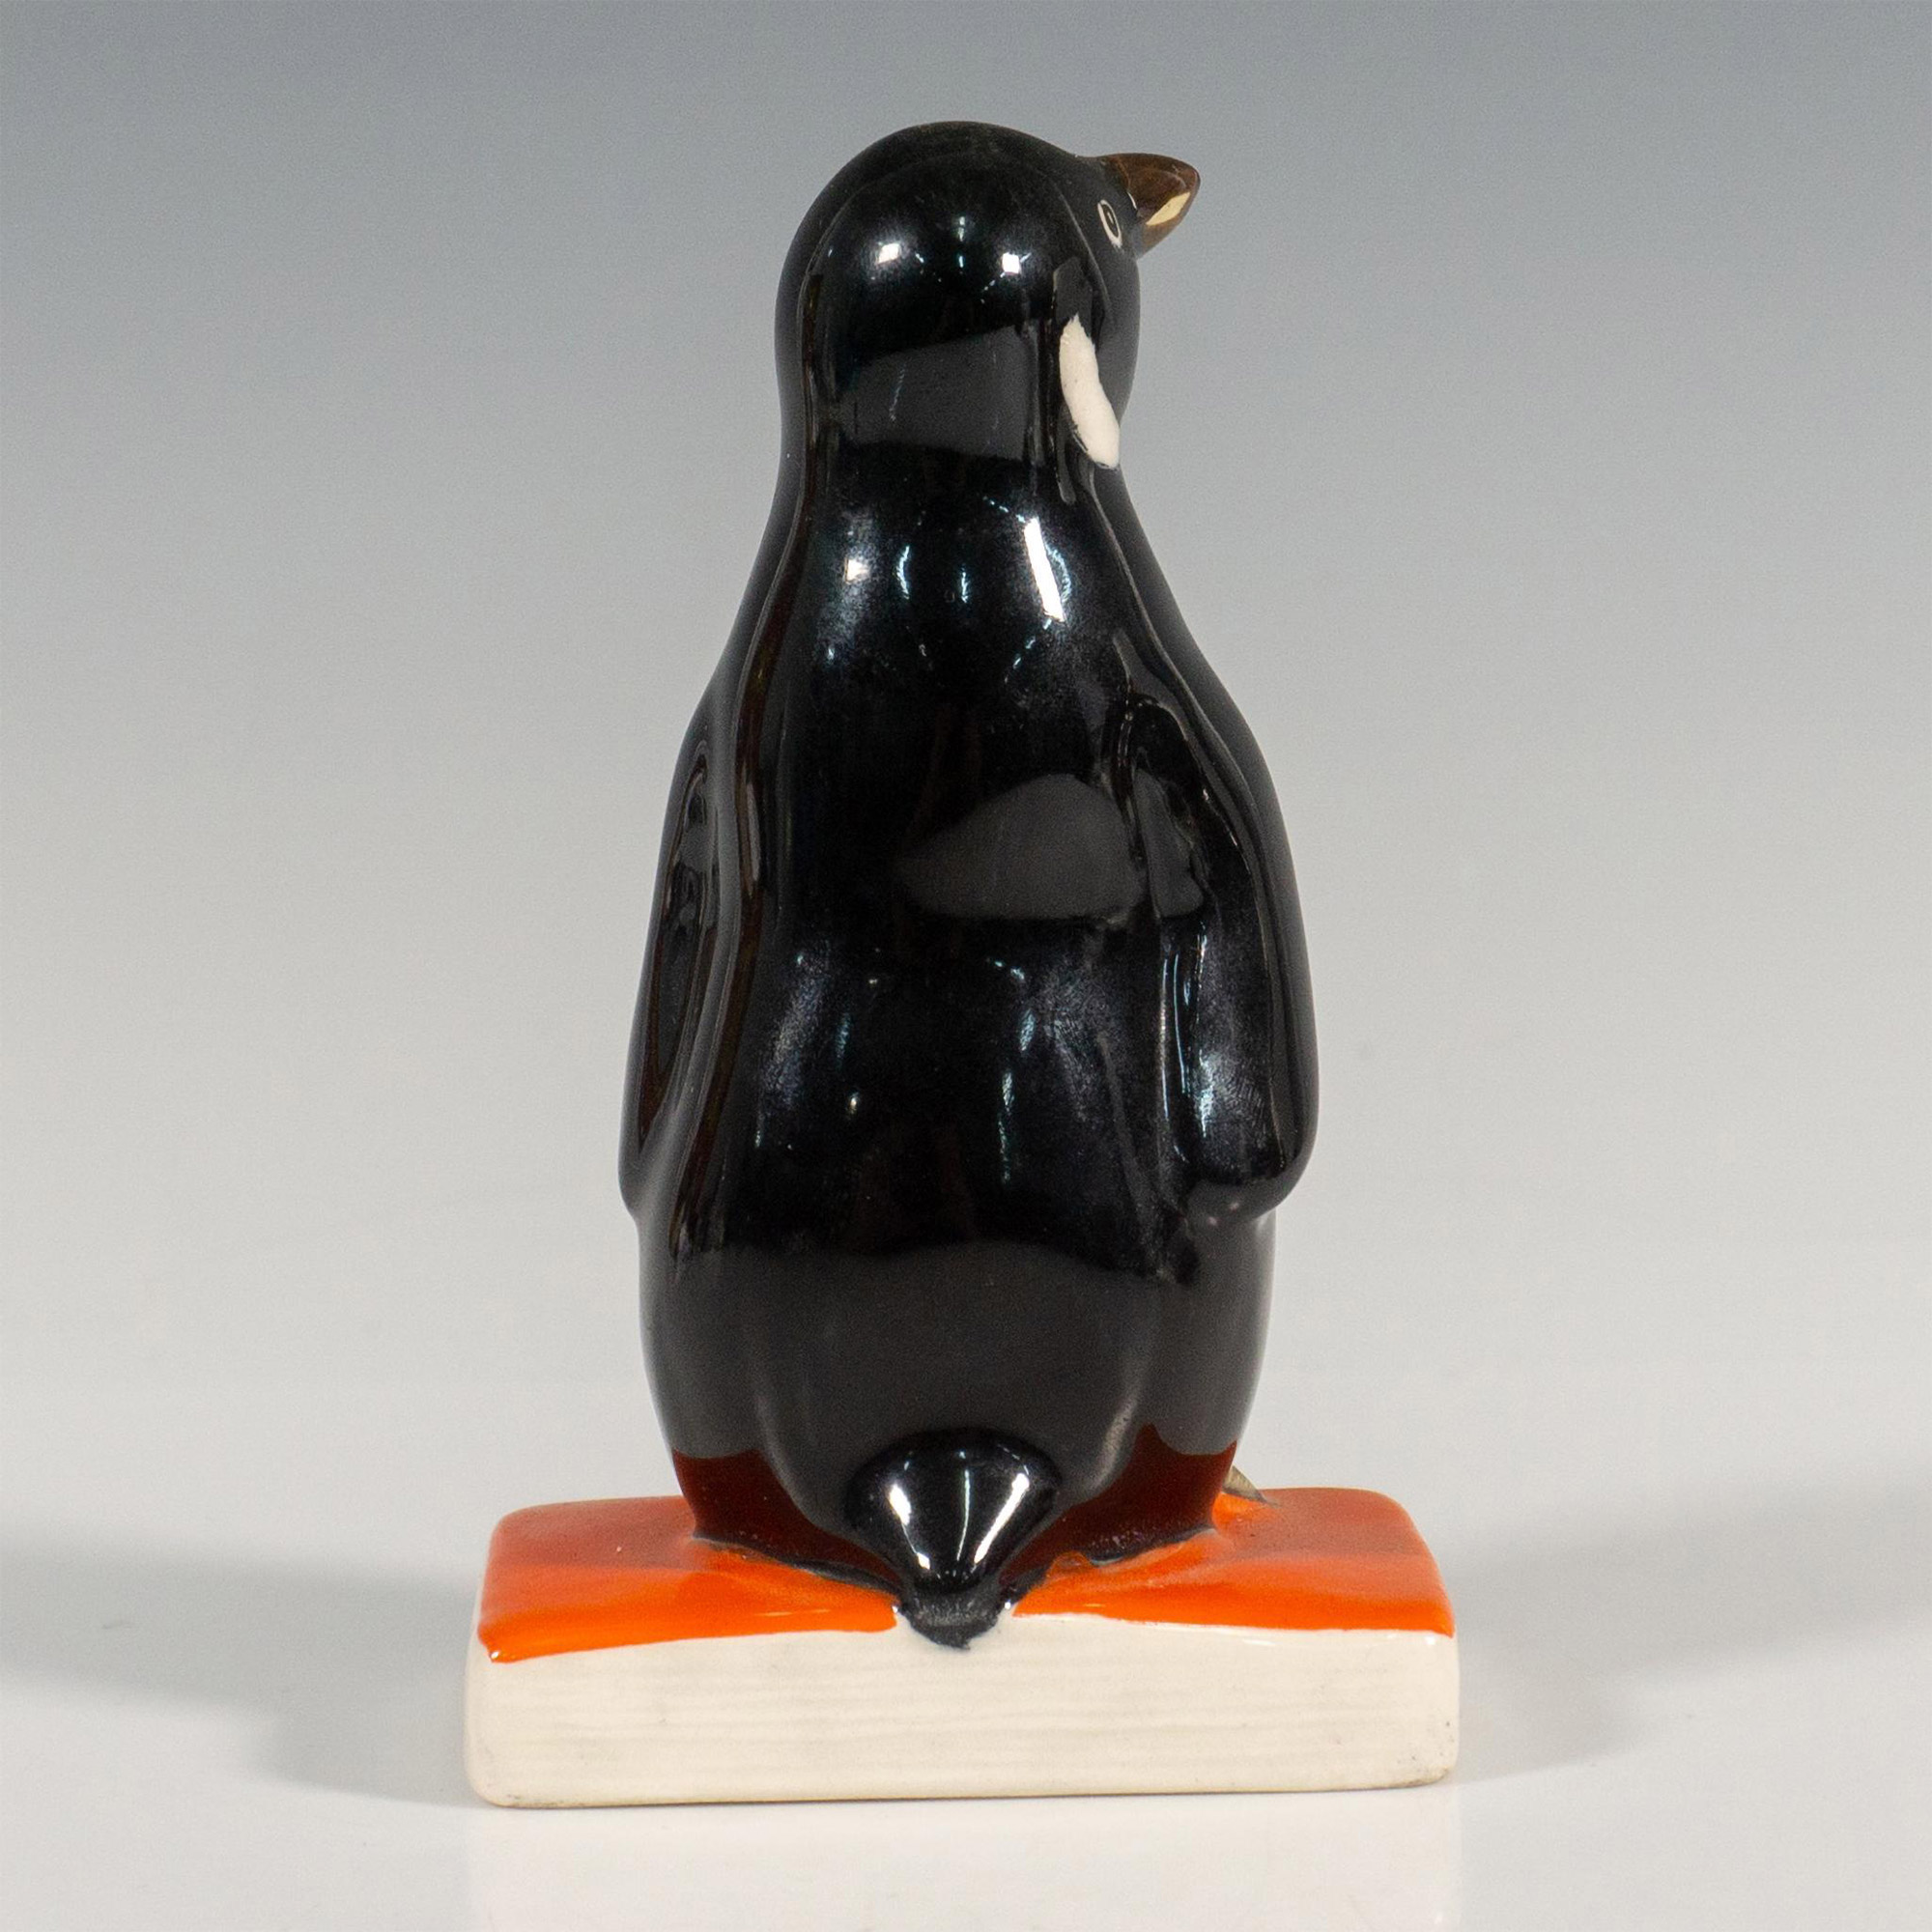 Best Wishes Penguin - Royal Doulton Advertising Figurine - Image 3 of 5